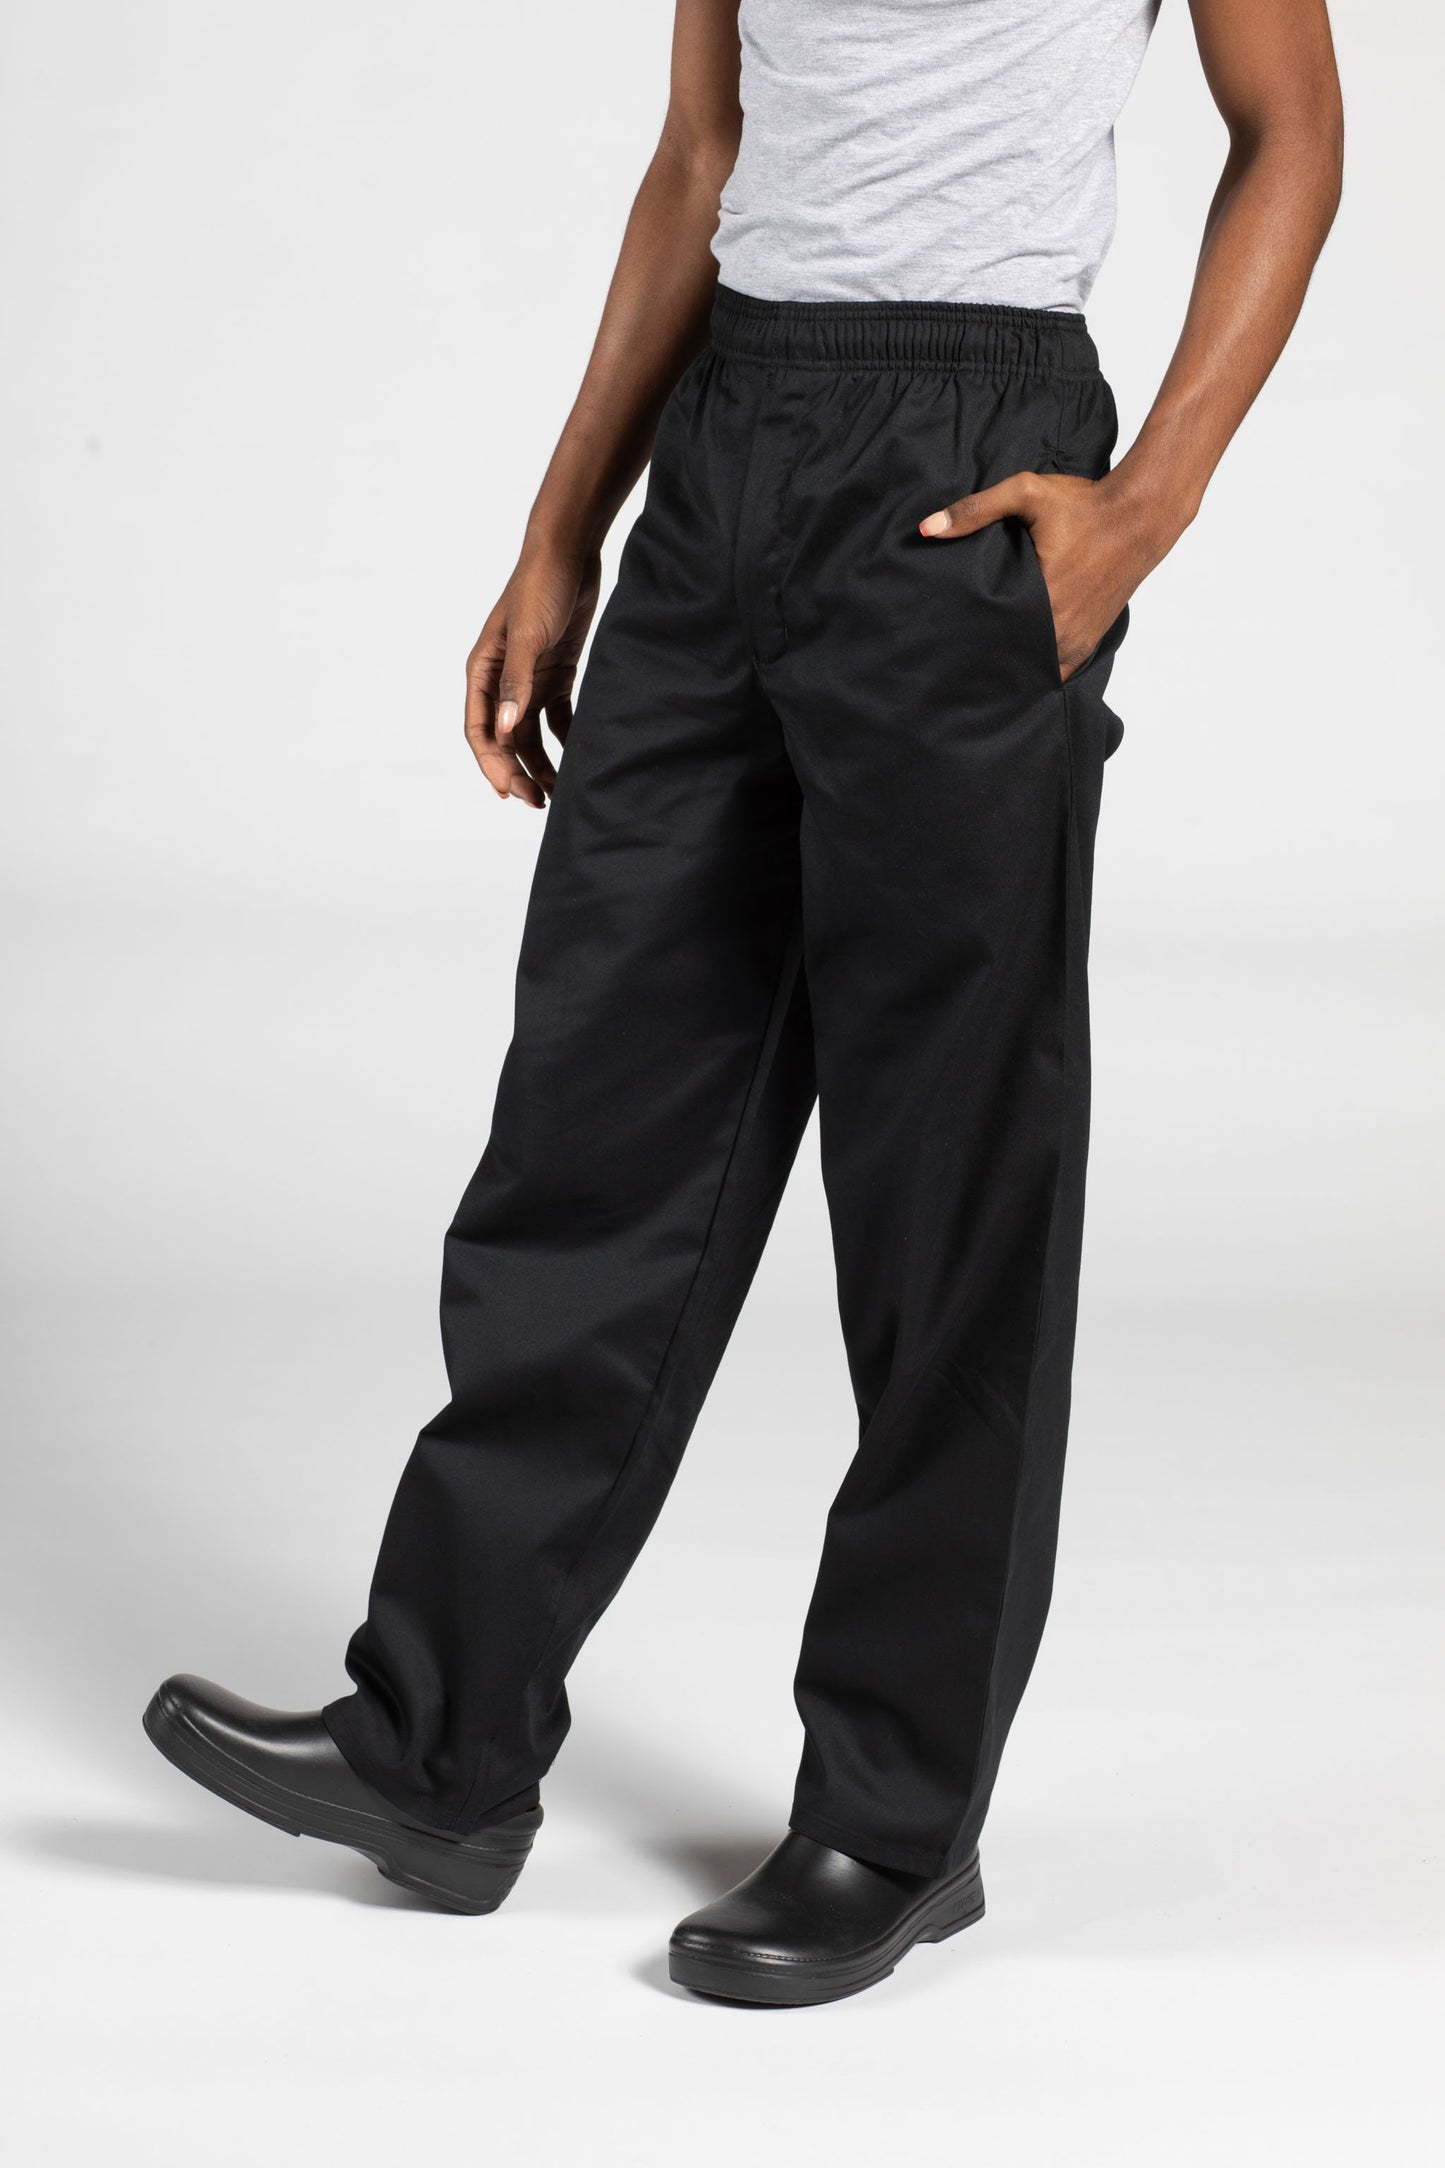 Classic Chef Pants with 3 inch Waist by Uncommon Threads